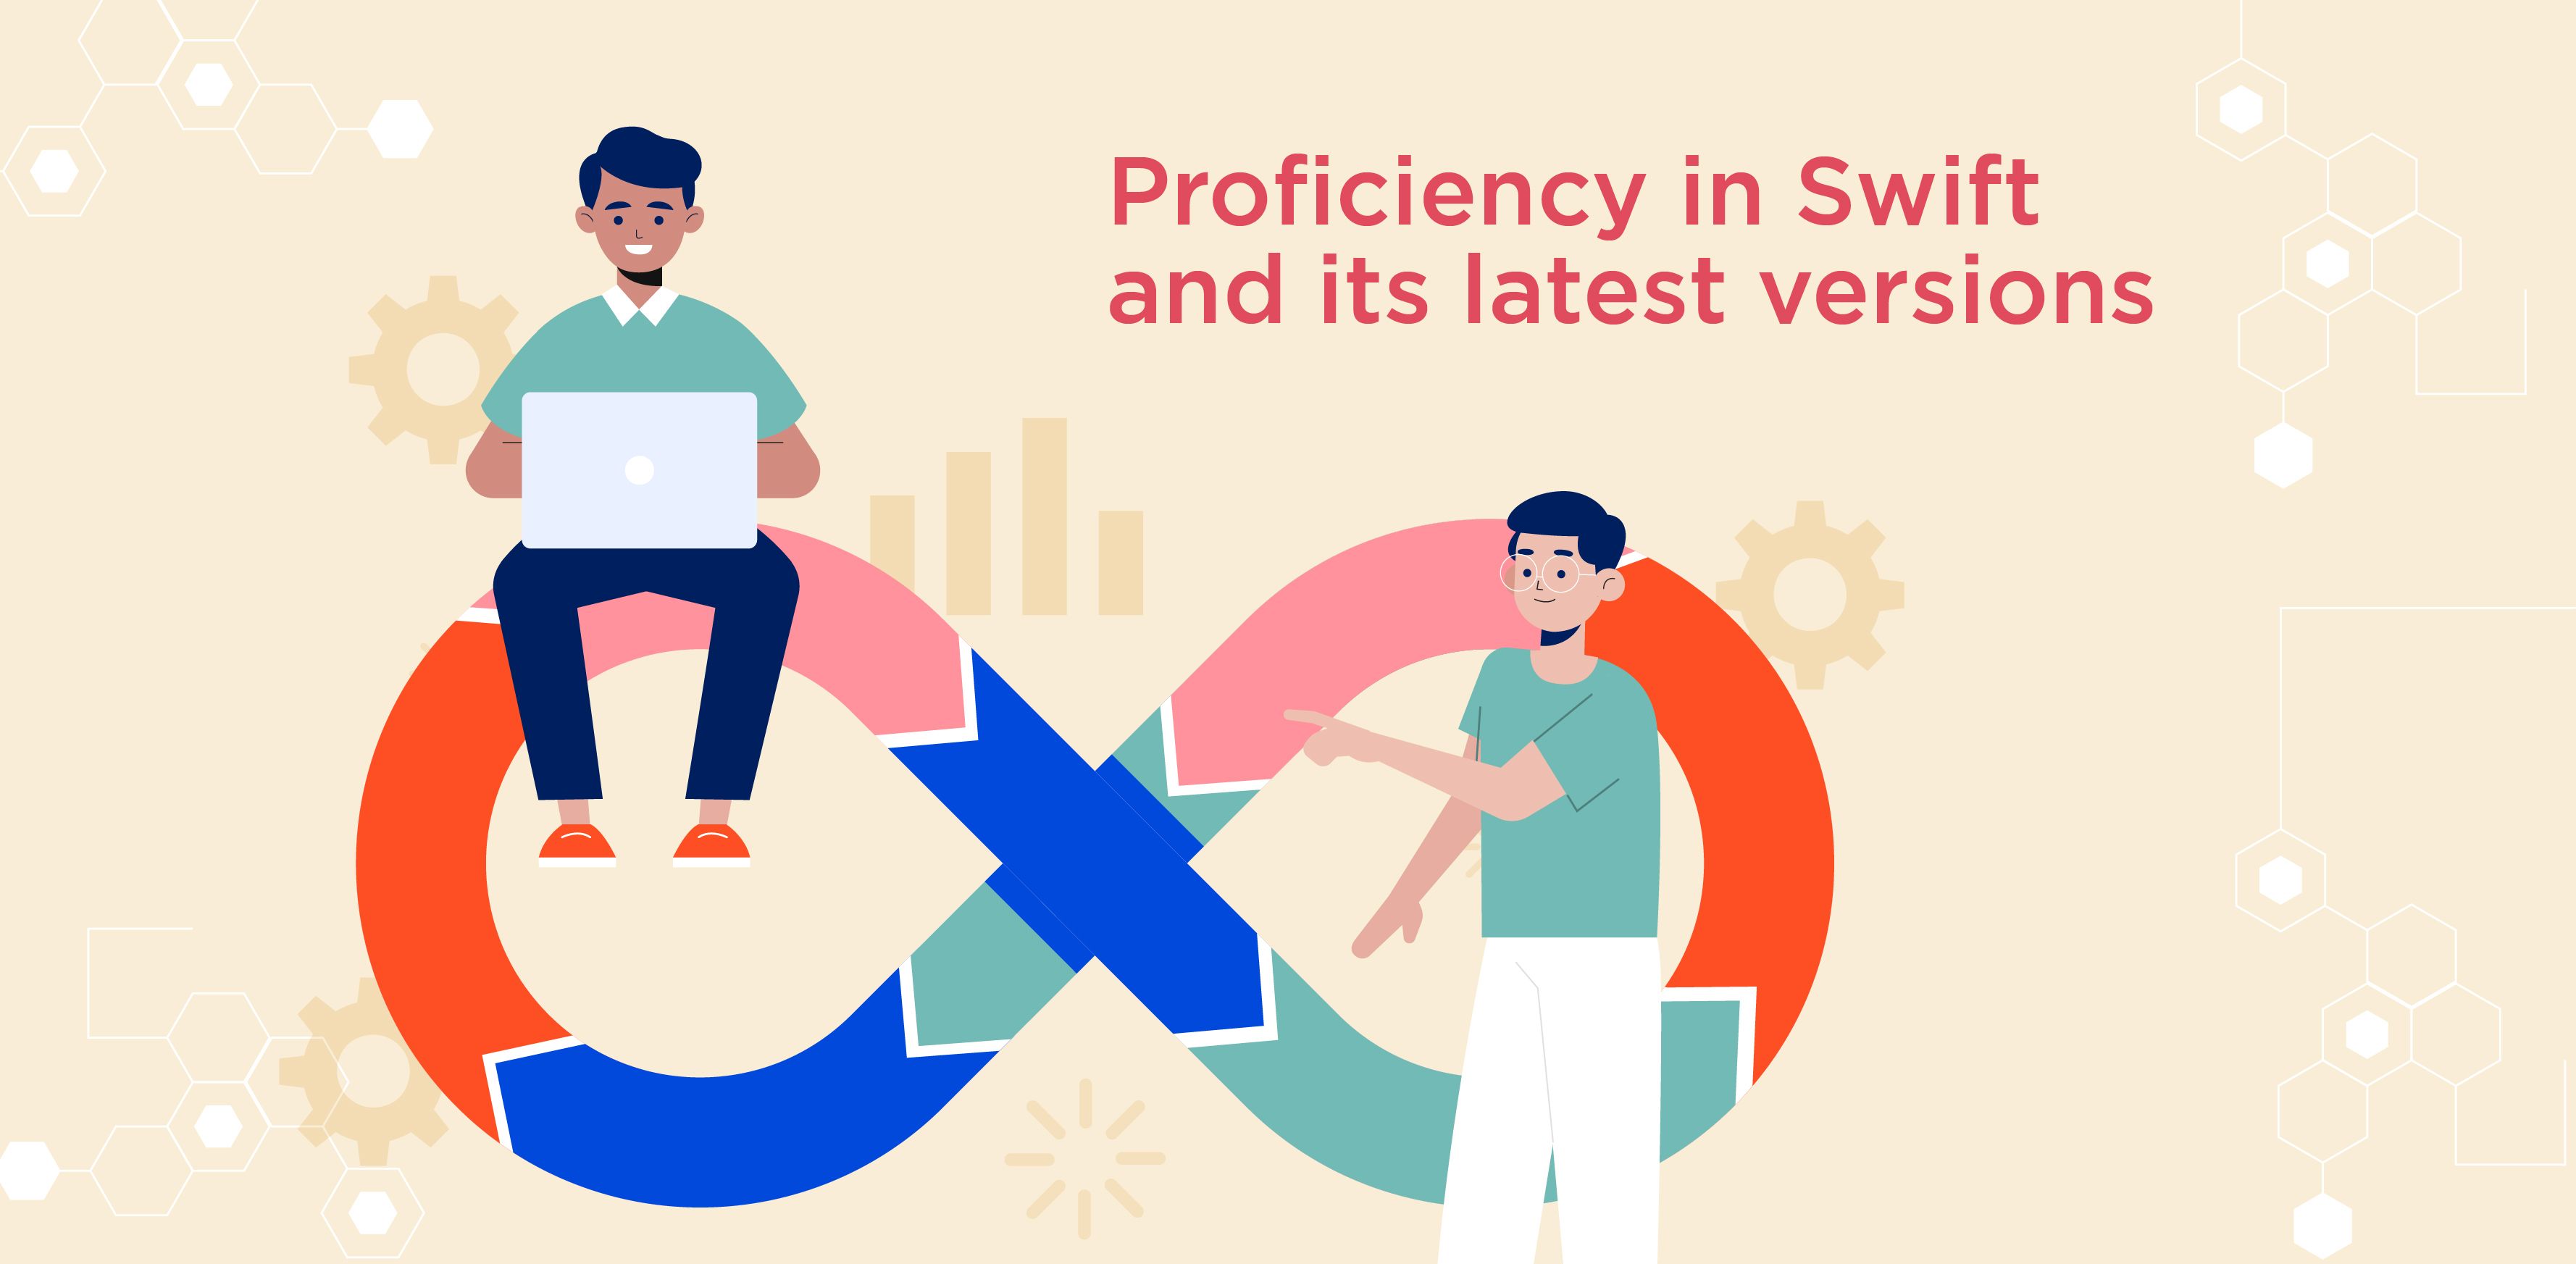 Proficiency in Swift and its latest versions